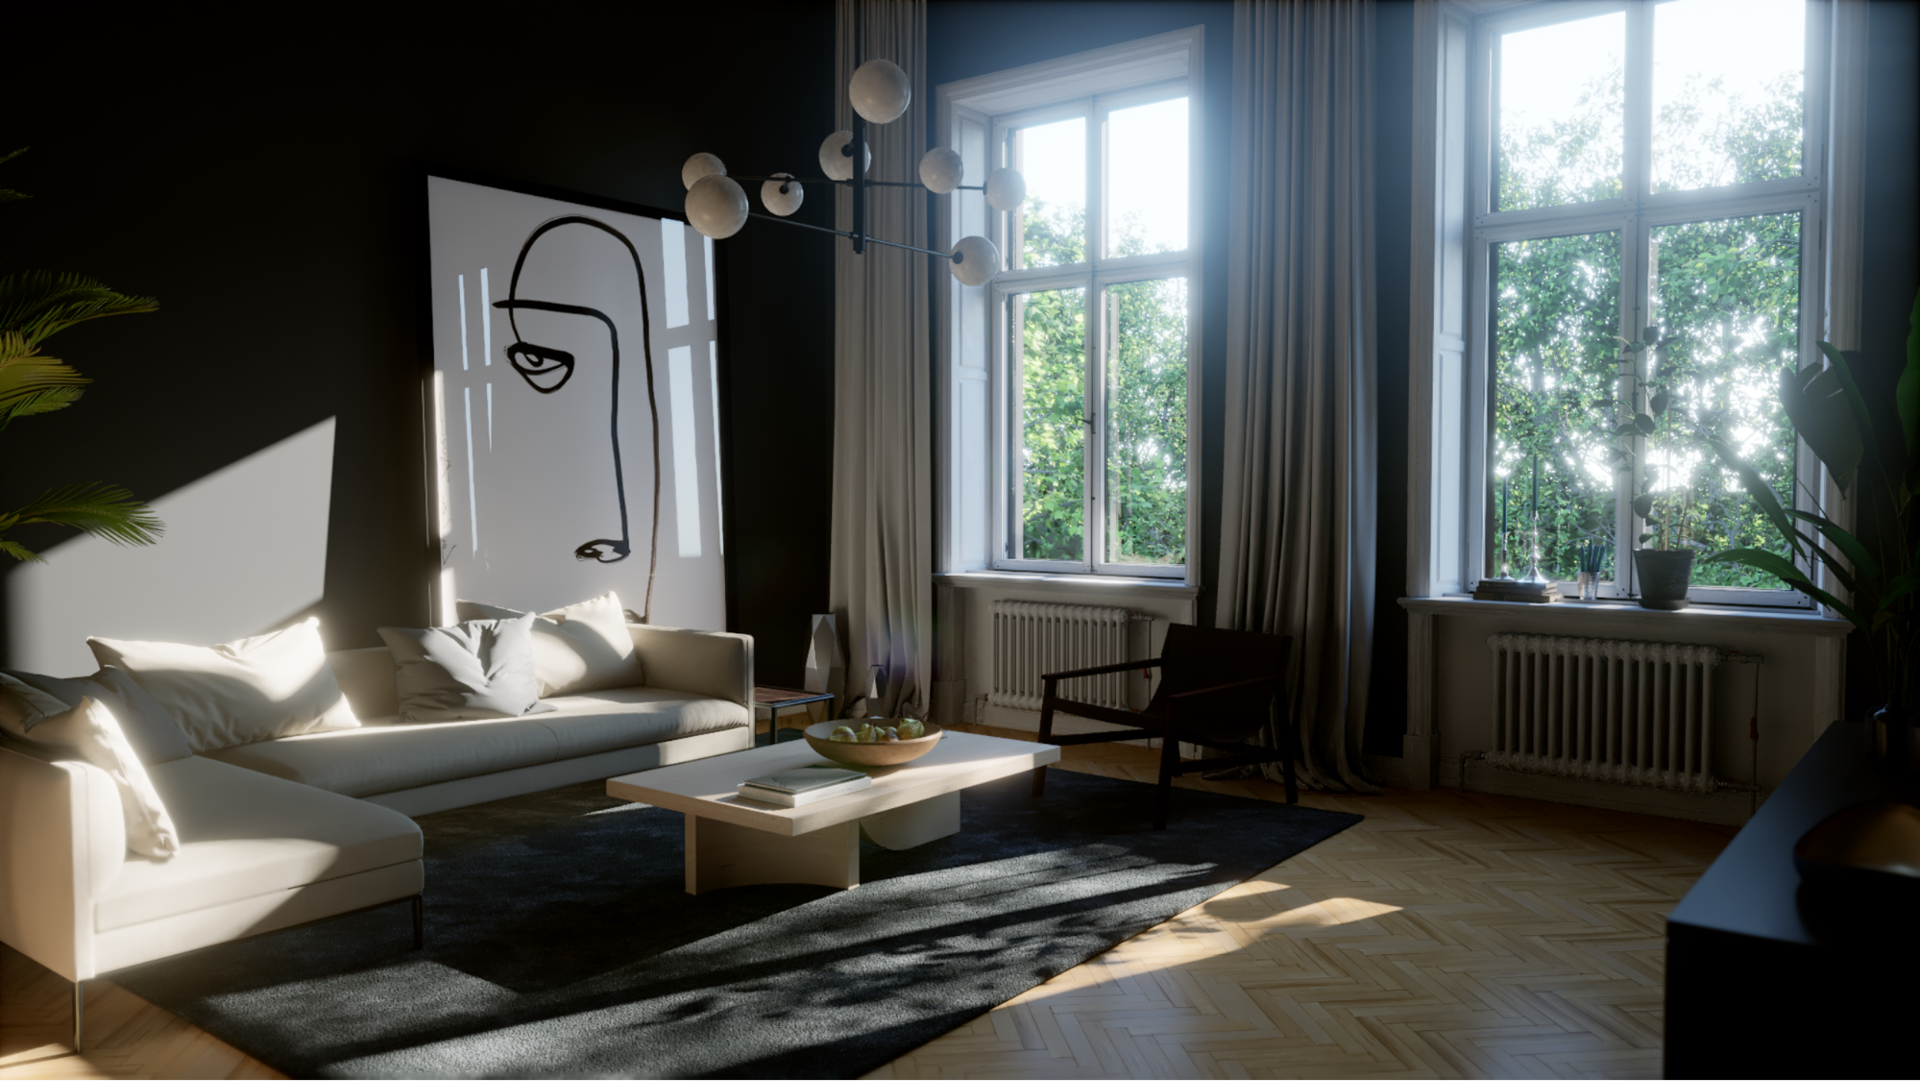 The Best of Both Worlds: Ray Tracing and Rasterization